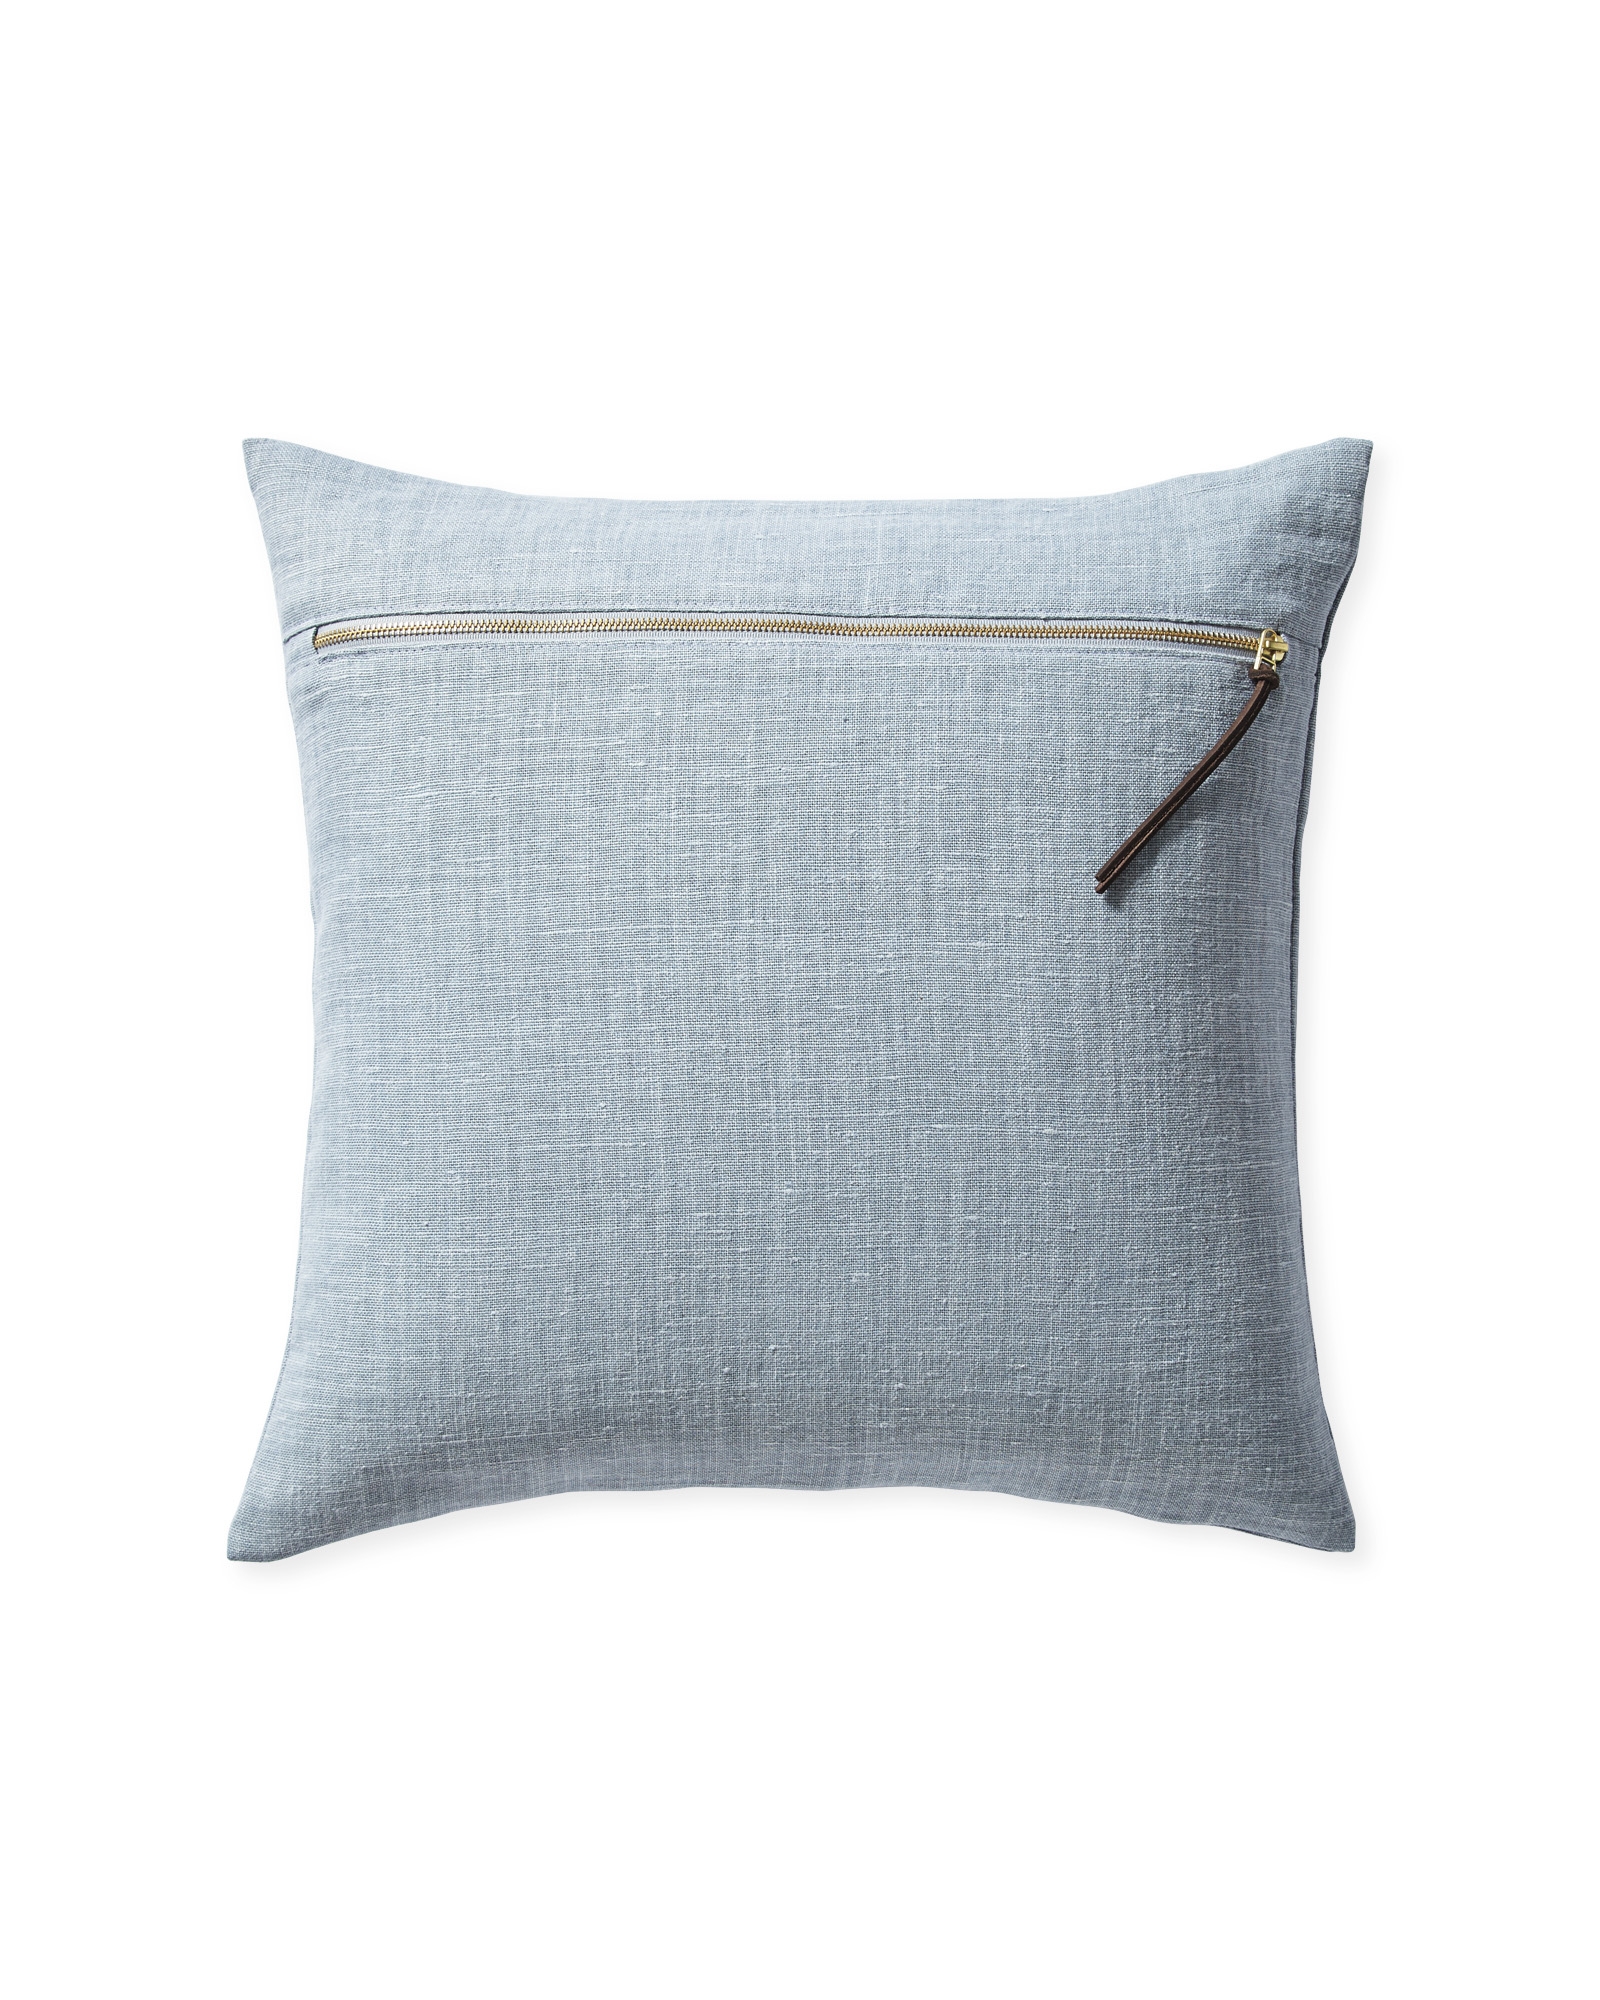 Kentfield 20" SQ Pillow Cover - Coastal Blue - Insert sold separately - Image 1